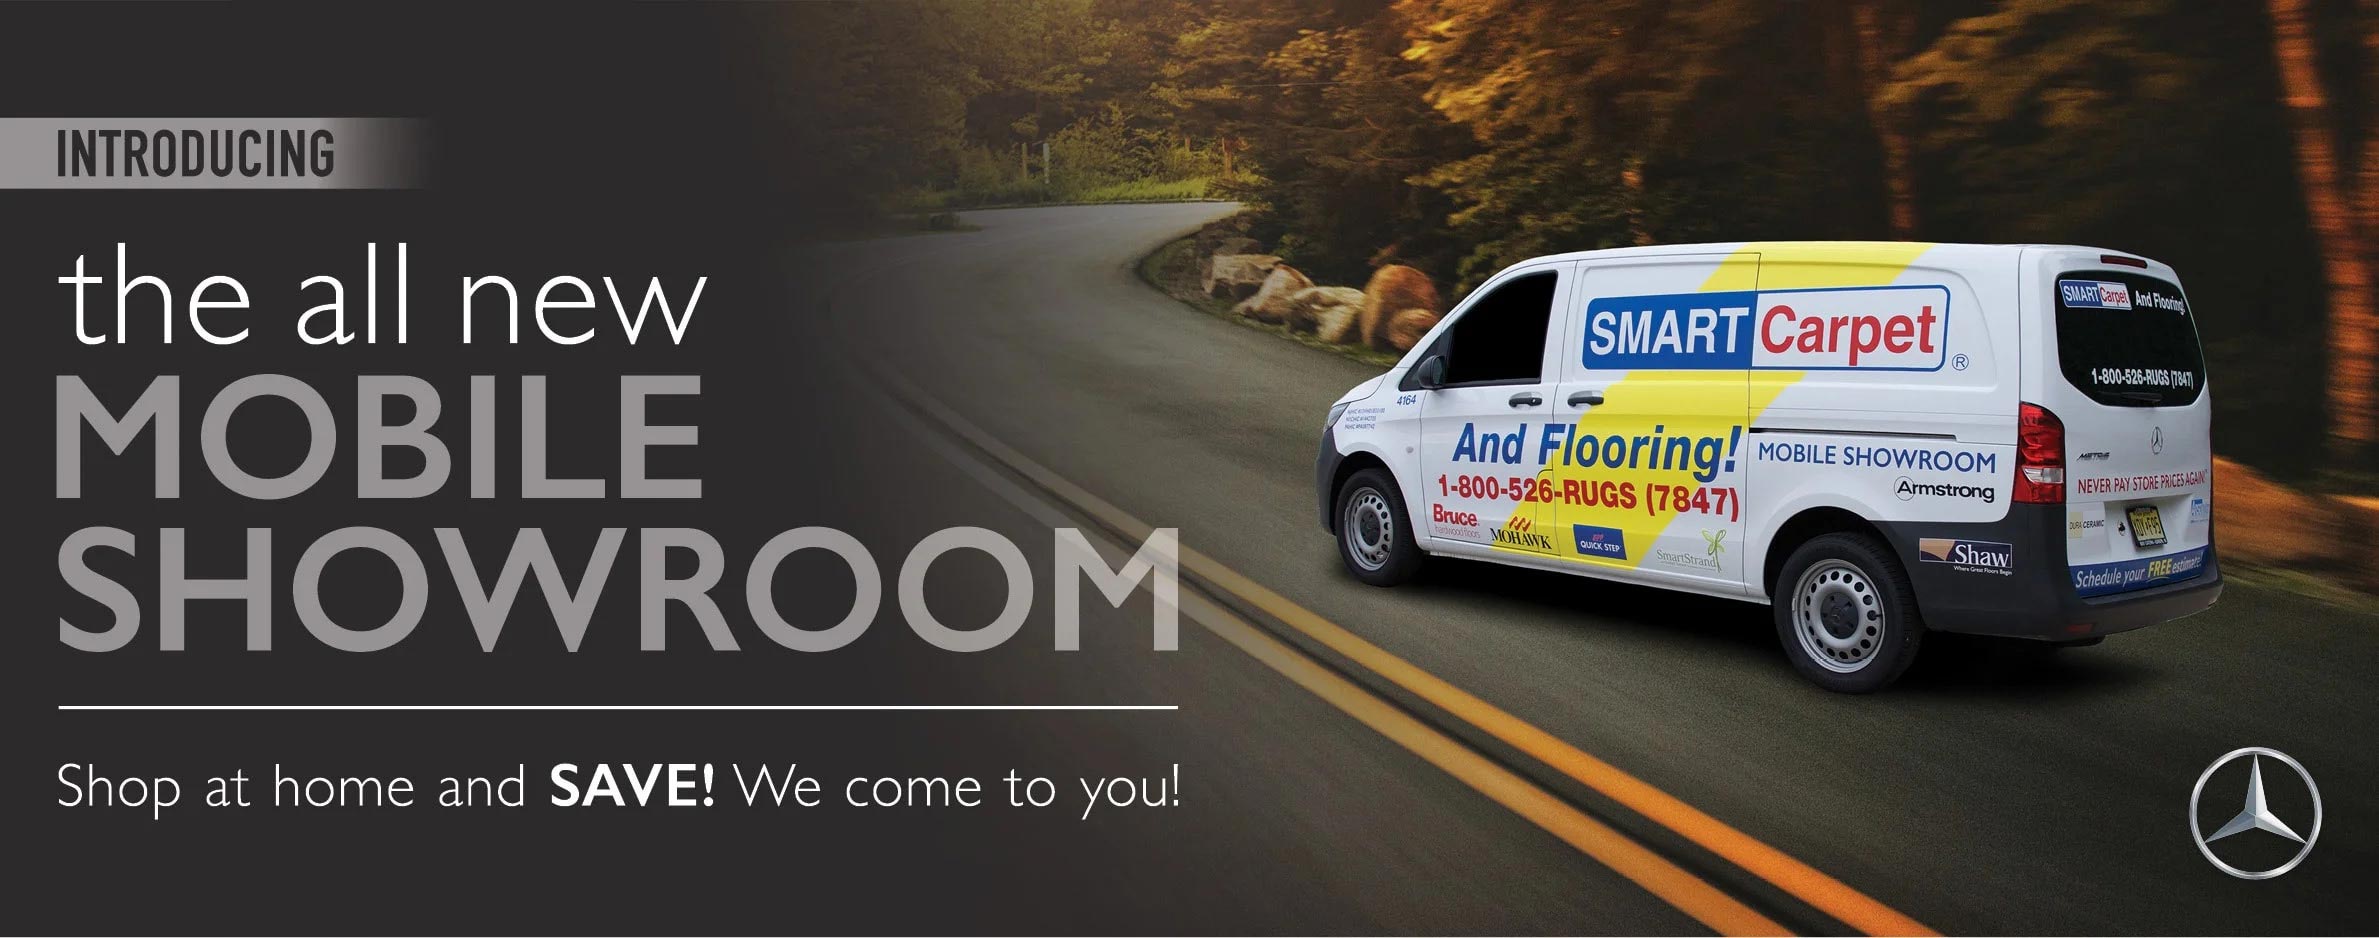 Smart Carpet and Flooring van with mobile showroom ad